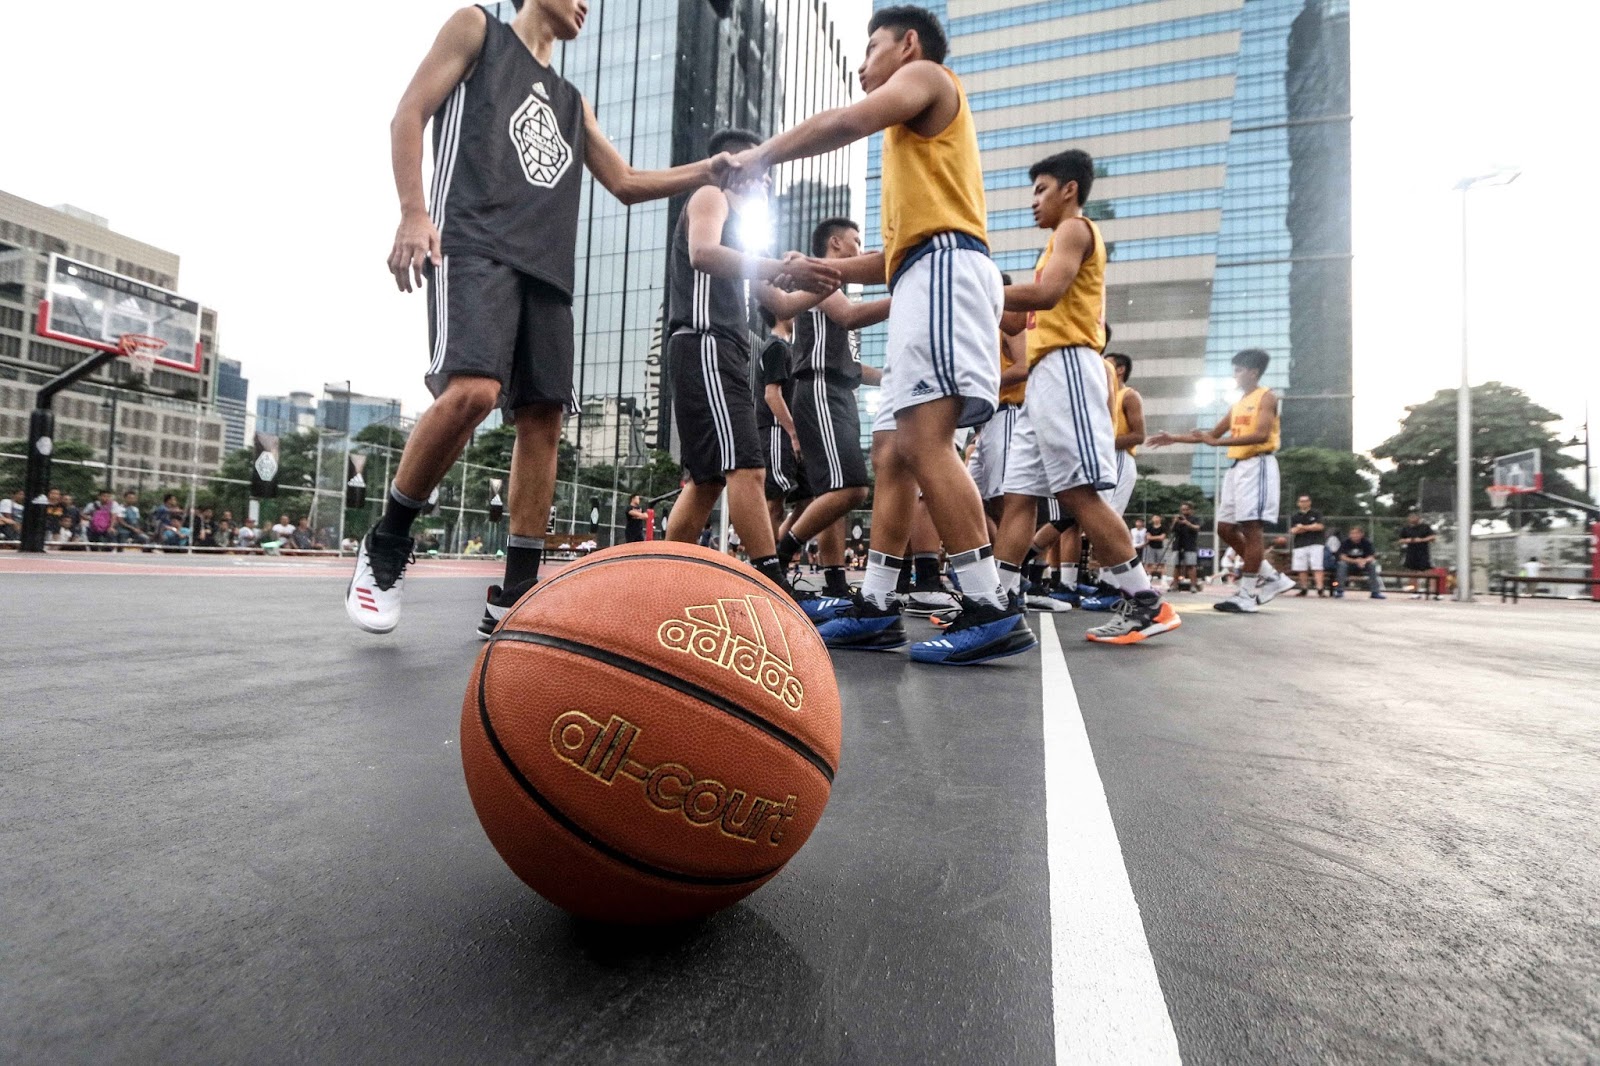 Manila Life: The future of Philippine basketball is here